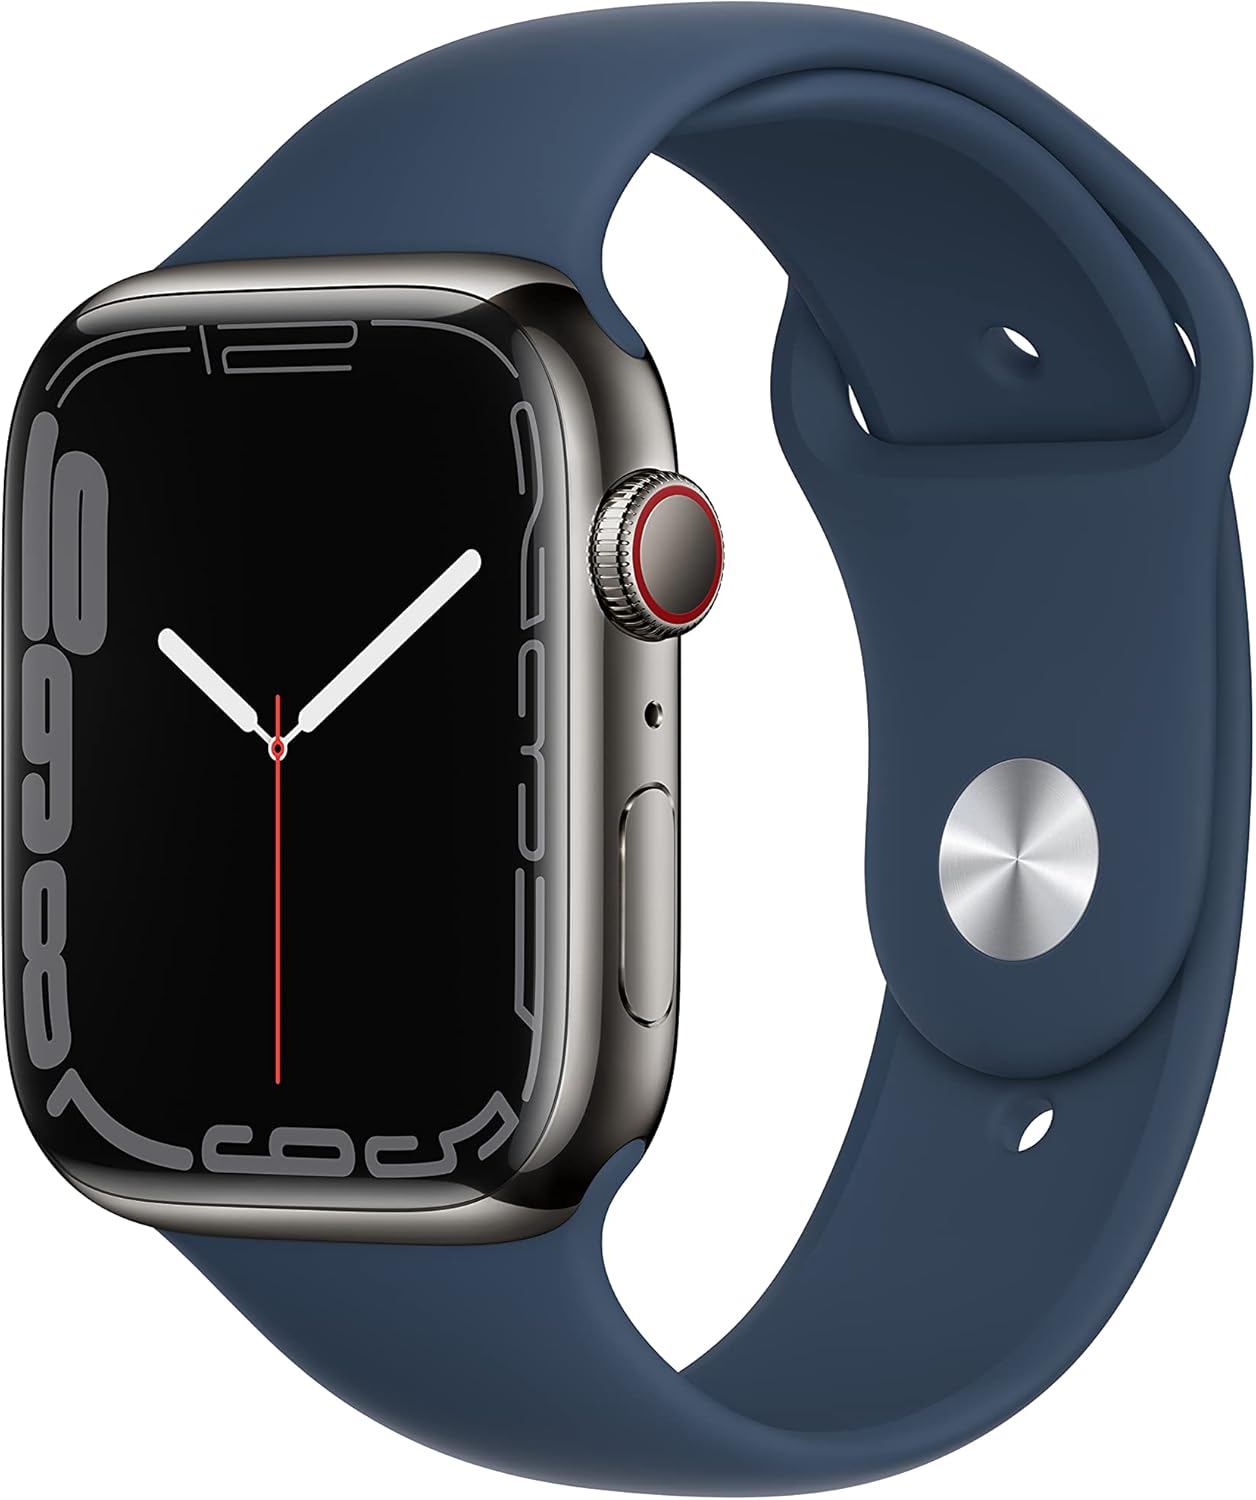 Apple Watch Series 7 Stainless Steel Cellular: Save $356